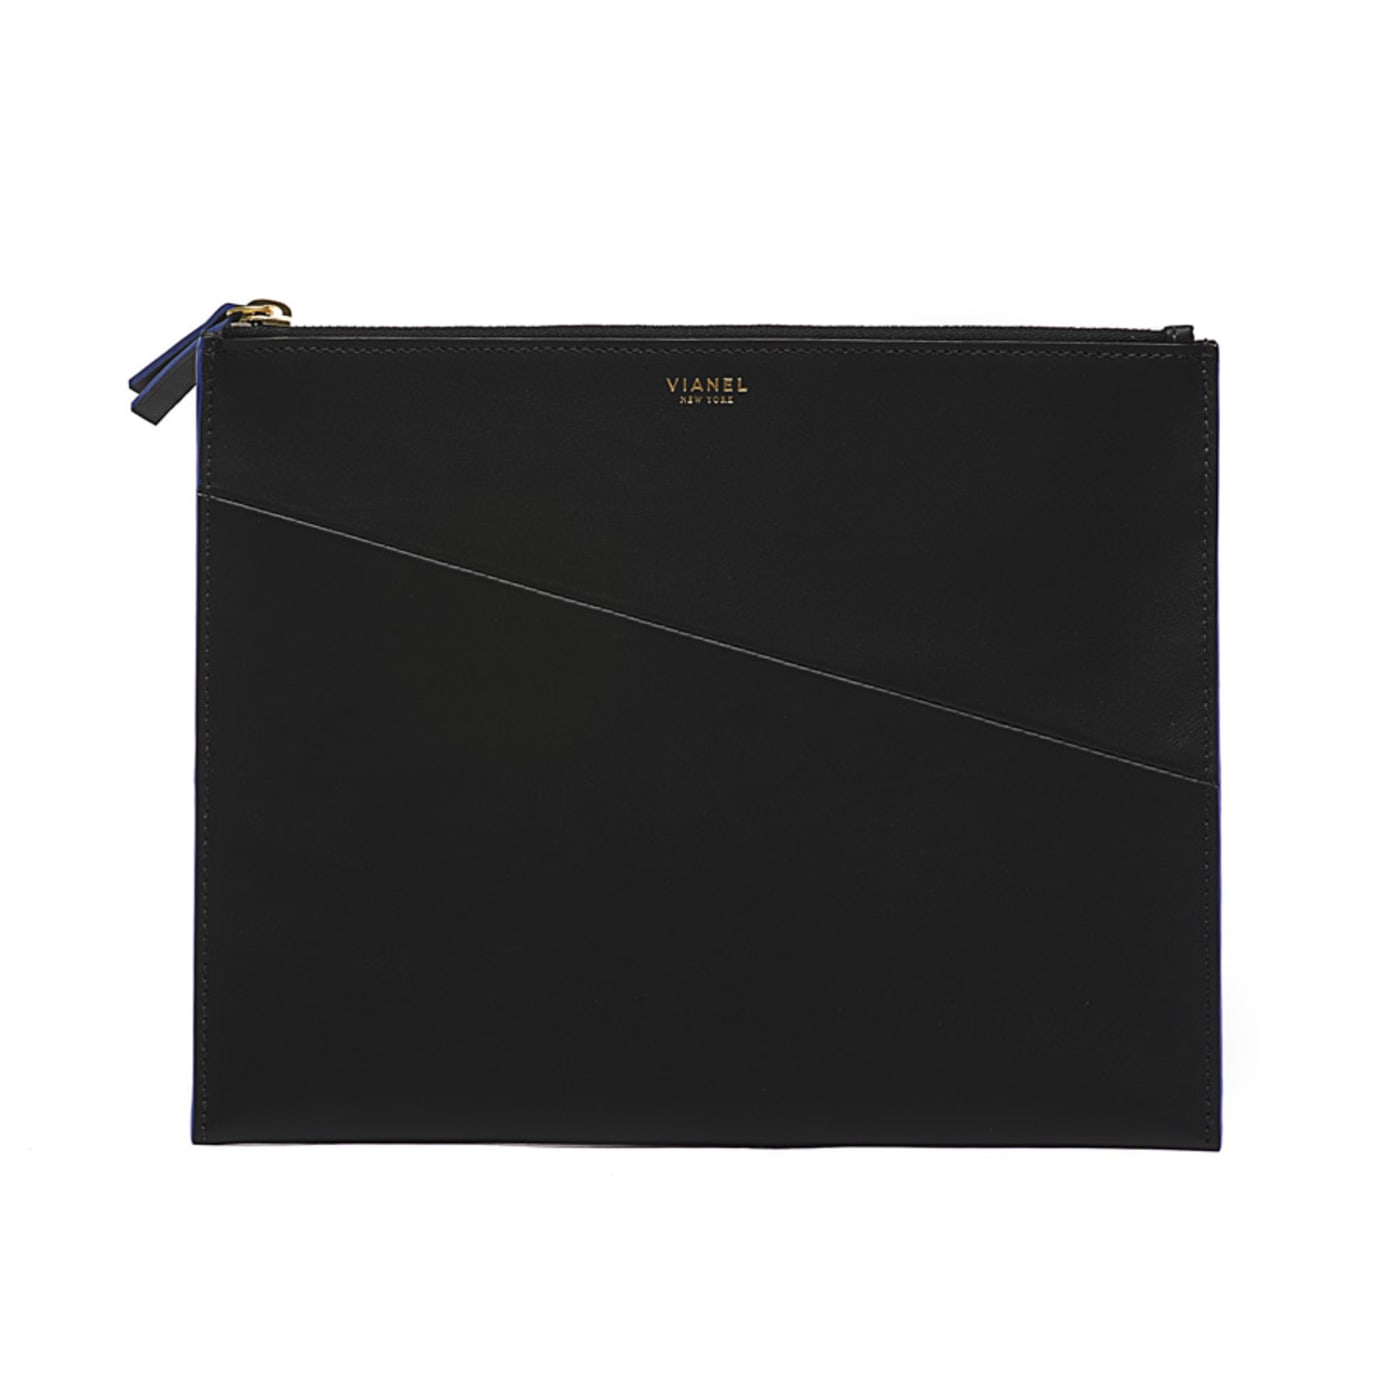 Calfskin Billfolds and Lizard Wallets From Vianel Spring 2014 Are Now ...